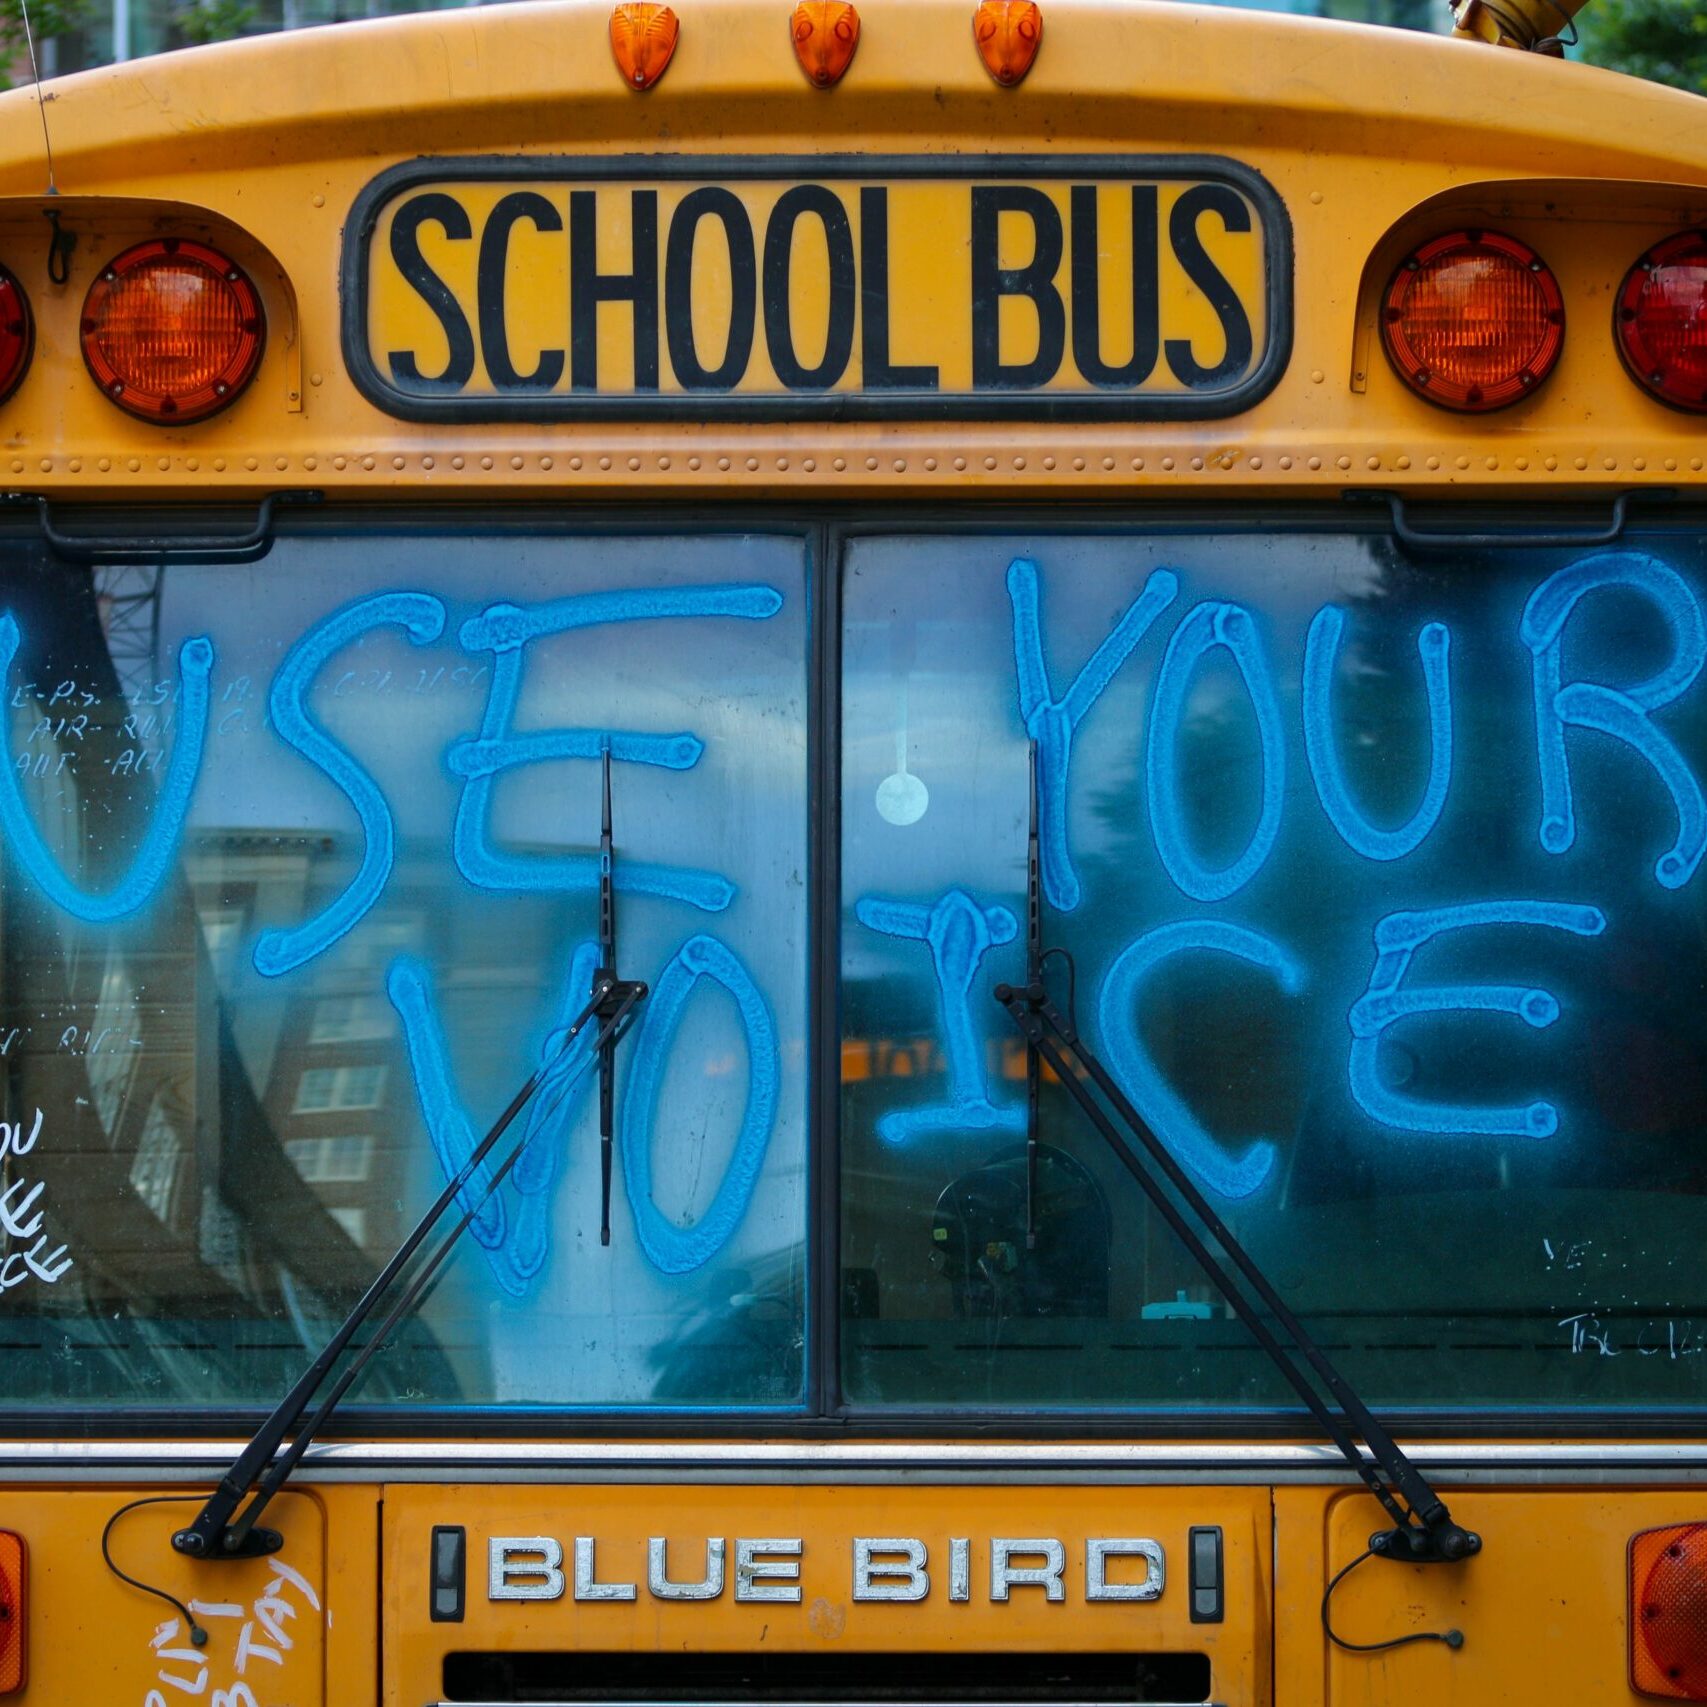 Image of the front of a school bus with the front windshield saying "use your voice" spray painted in blue